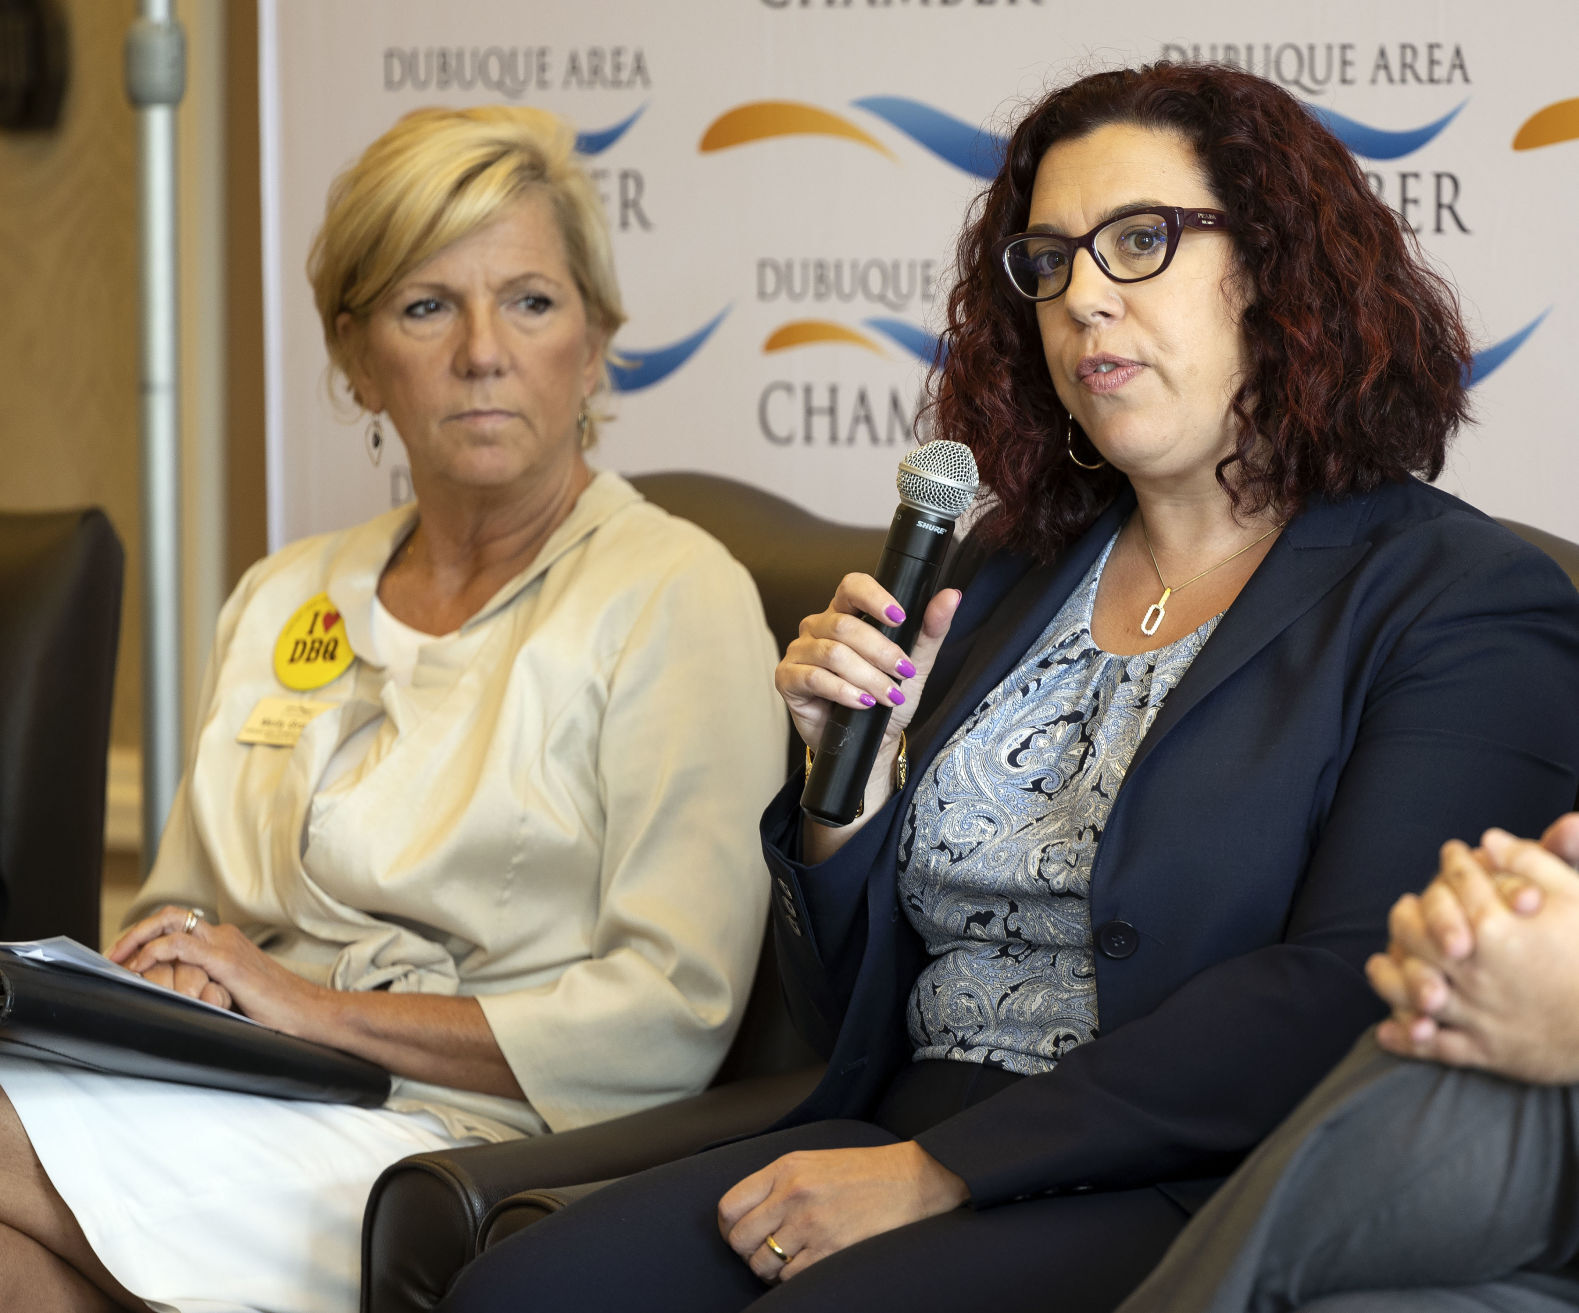 Molly Grover, president and CEO of Dubuque Area Chamber of Commerce, listens as Allison Dembeck speaks during a panel discussion. Dembeck is the vice president of government affairs for the U.S. Chamber of Commerce.    PHOTO CREDIT: Stephen Gassman